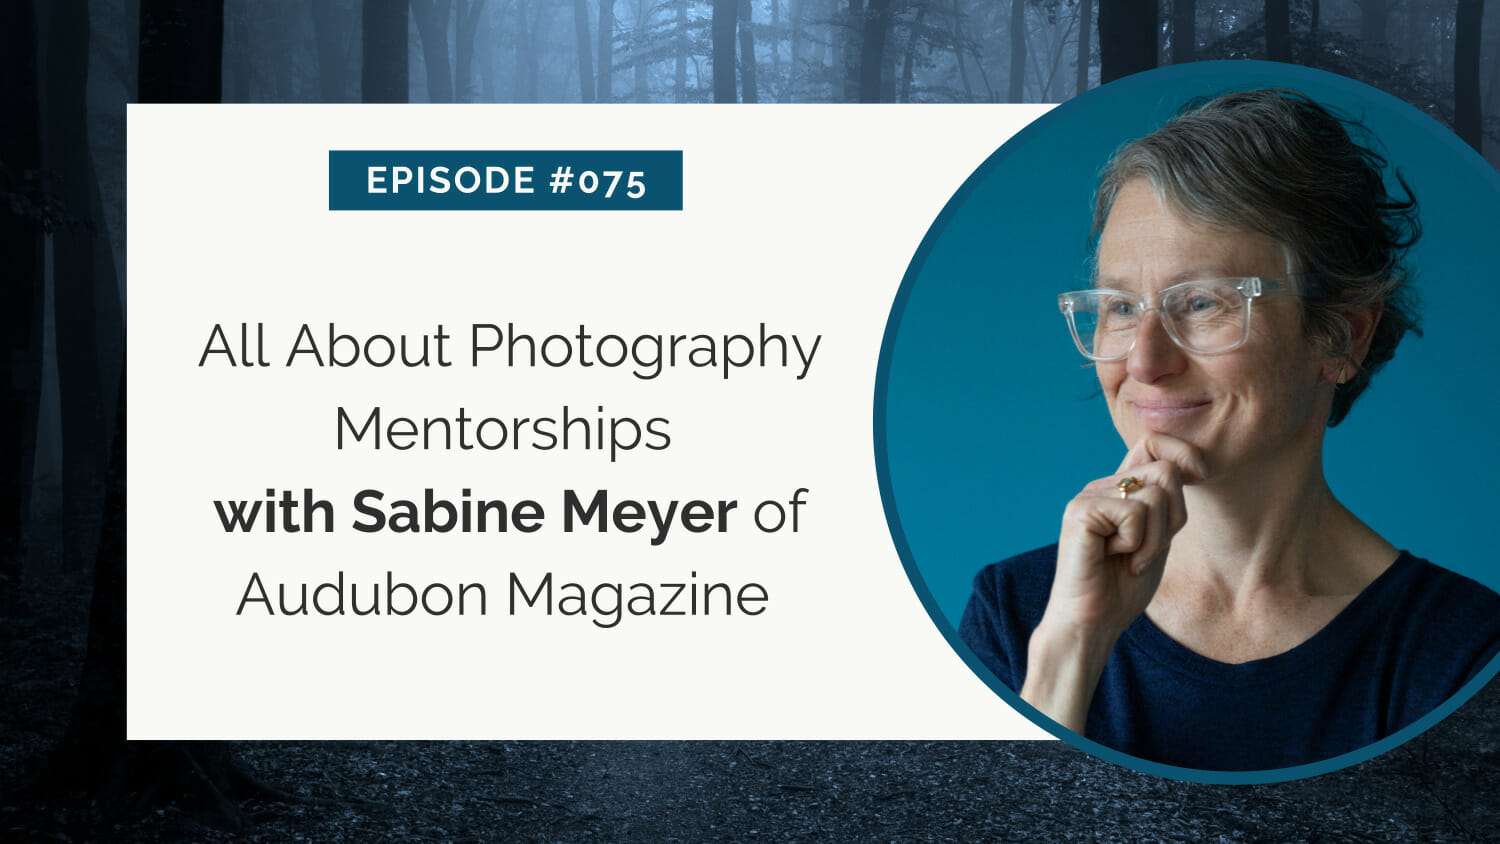 Promotional image for a podcast episode titled "all about photography mentorships with sabine meyer of audubon magazine," showcasing the featured guest smiling.